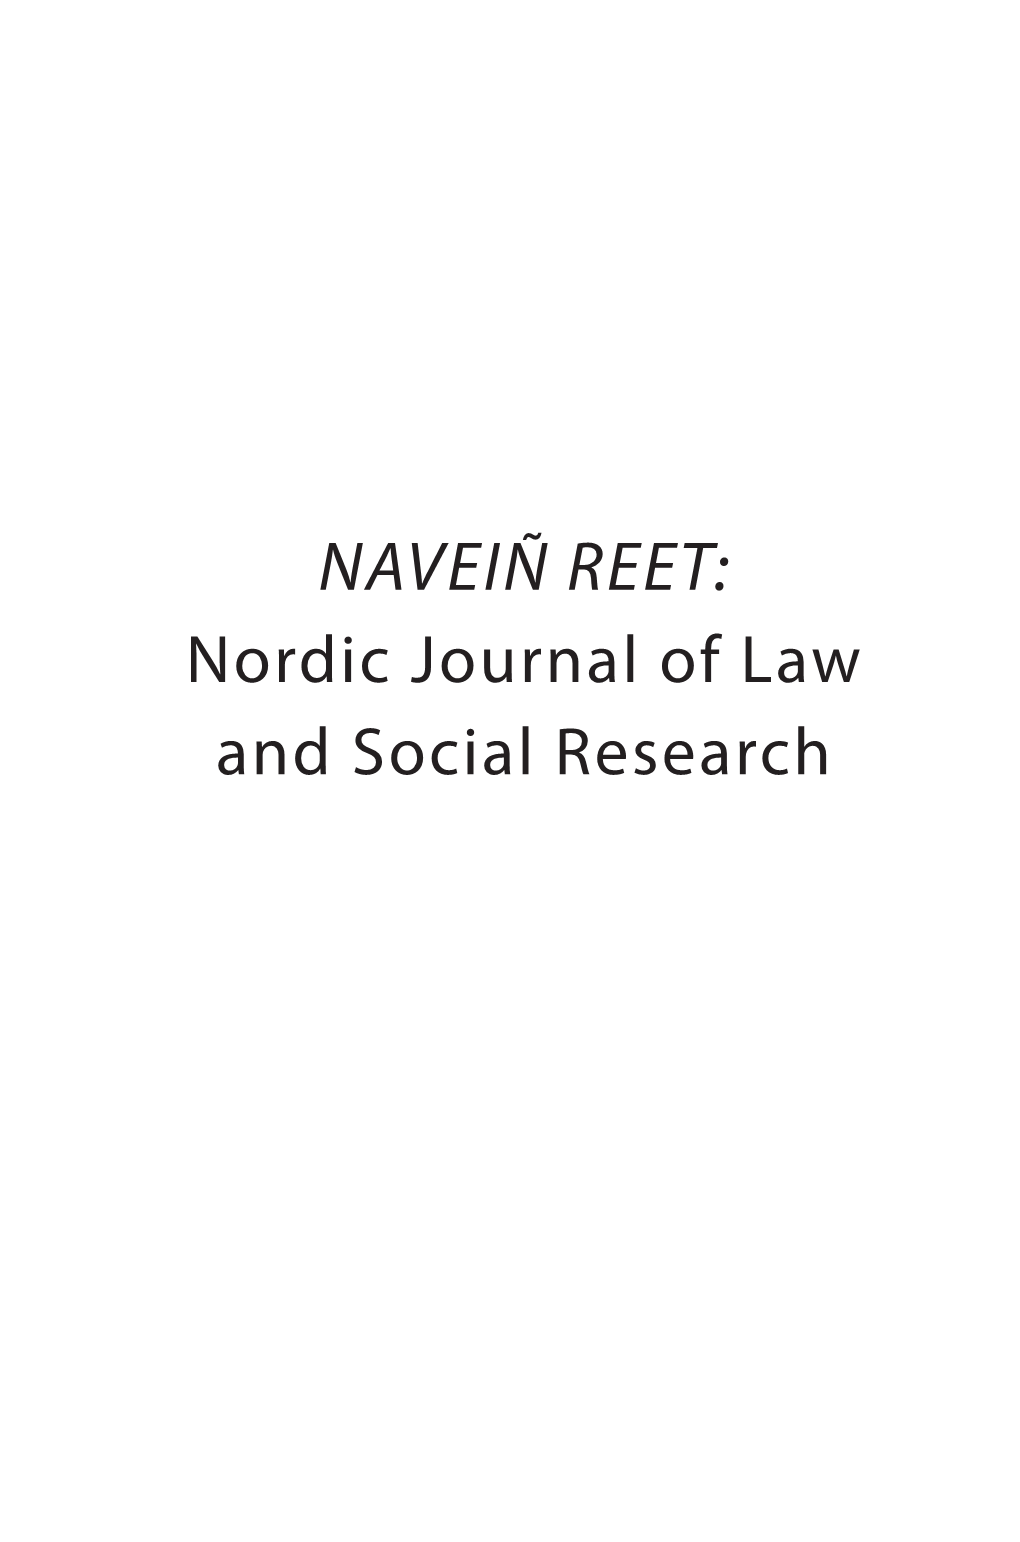 NAVEIÑ REET: Nordic Journal of Law and Social Research NAVEIÑ REET: Nordic Journal of Law and Social Research (NNJLSR) Is a Peer Reviewed Annual Research Journal